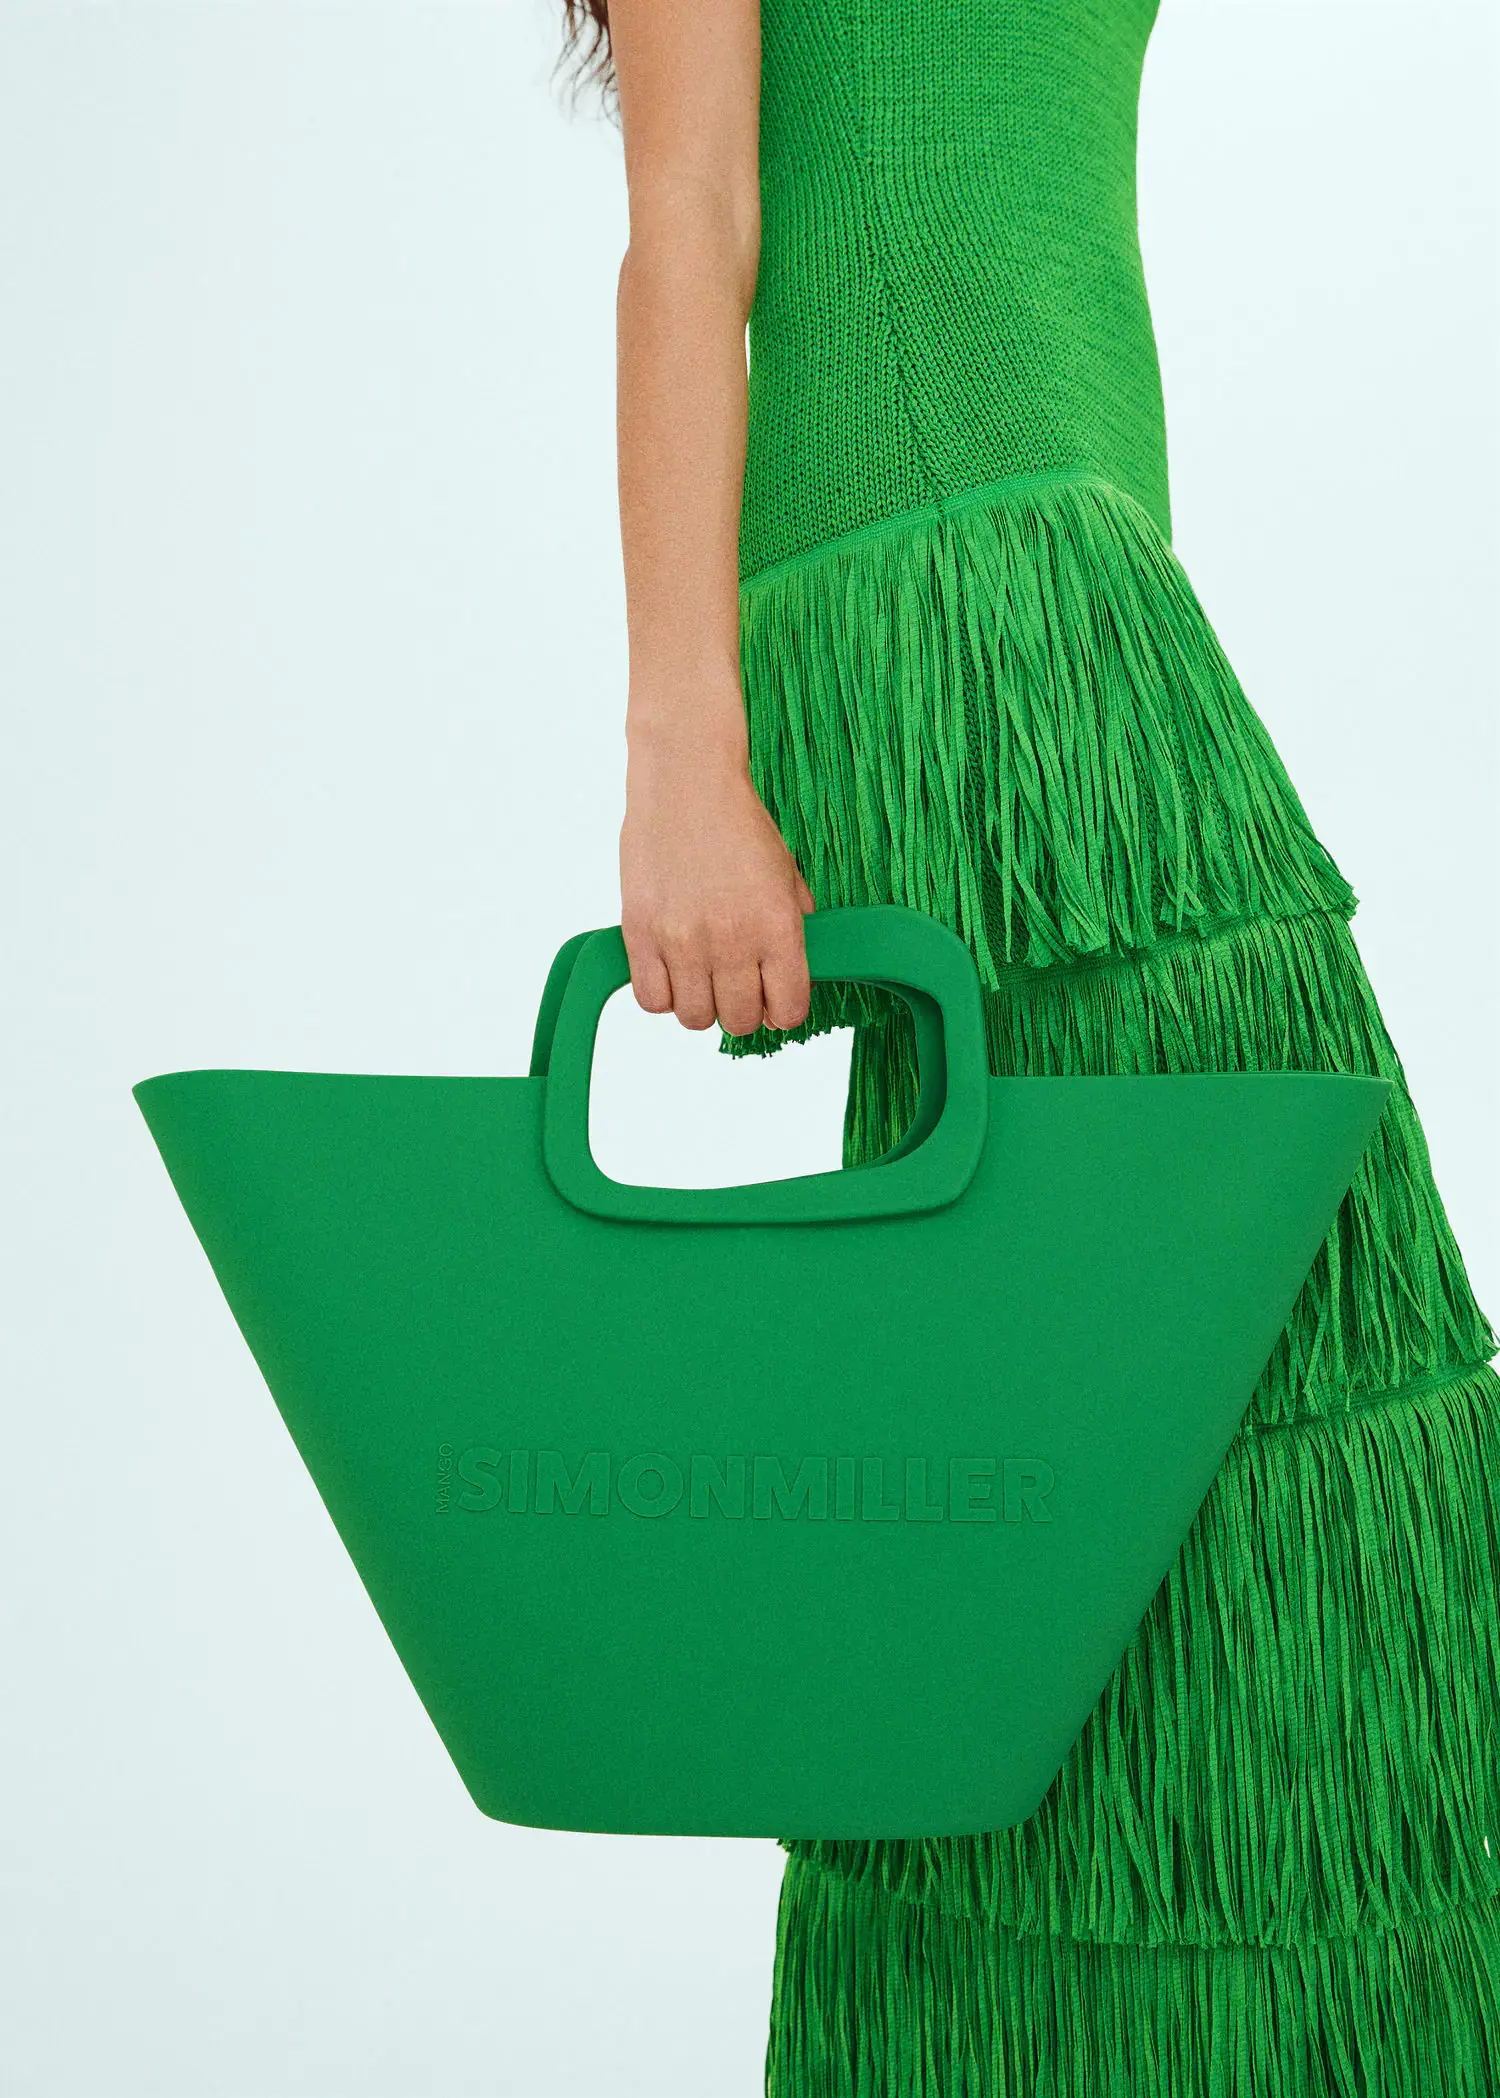 Mango Bag with geometric logo design. a person in a green dress holding a bag. 